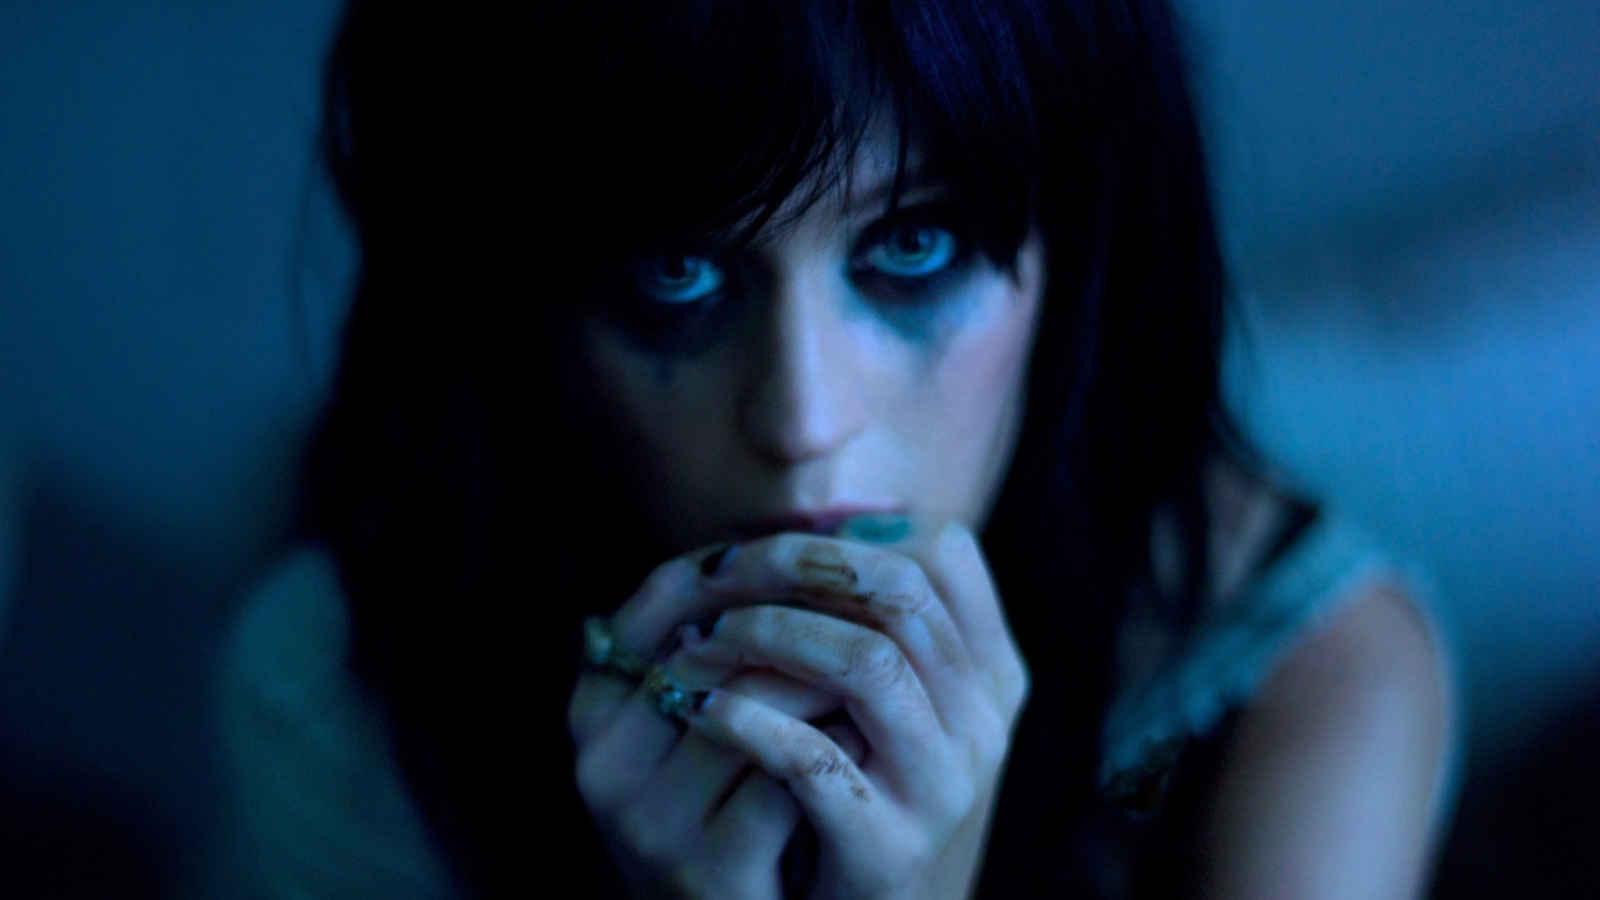 Katy Perry - The One That Got Away wallpaper 1600x900